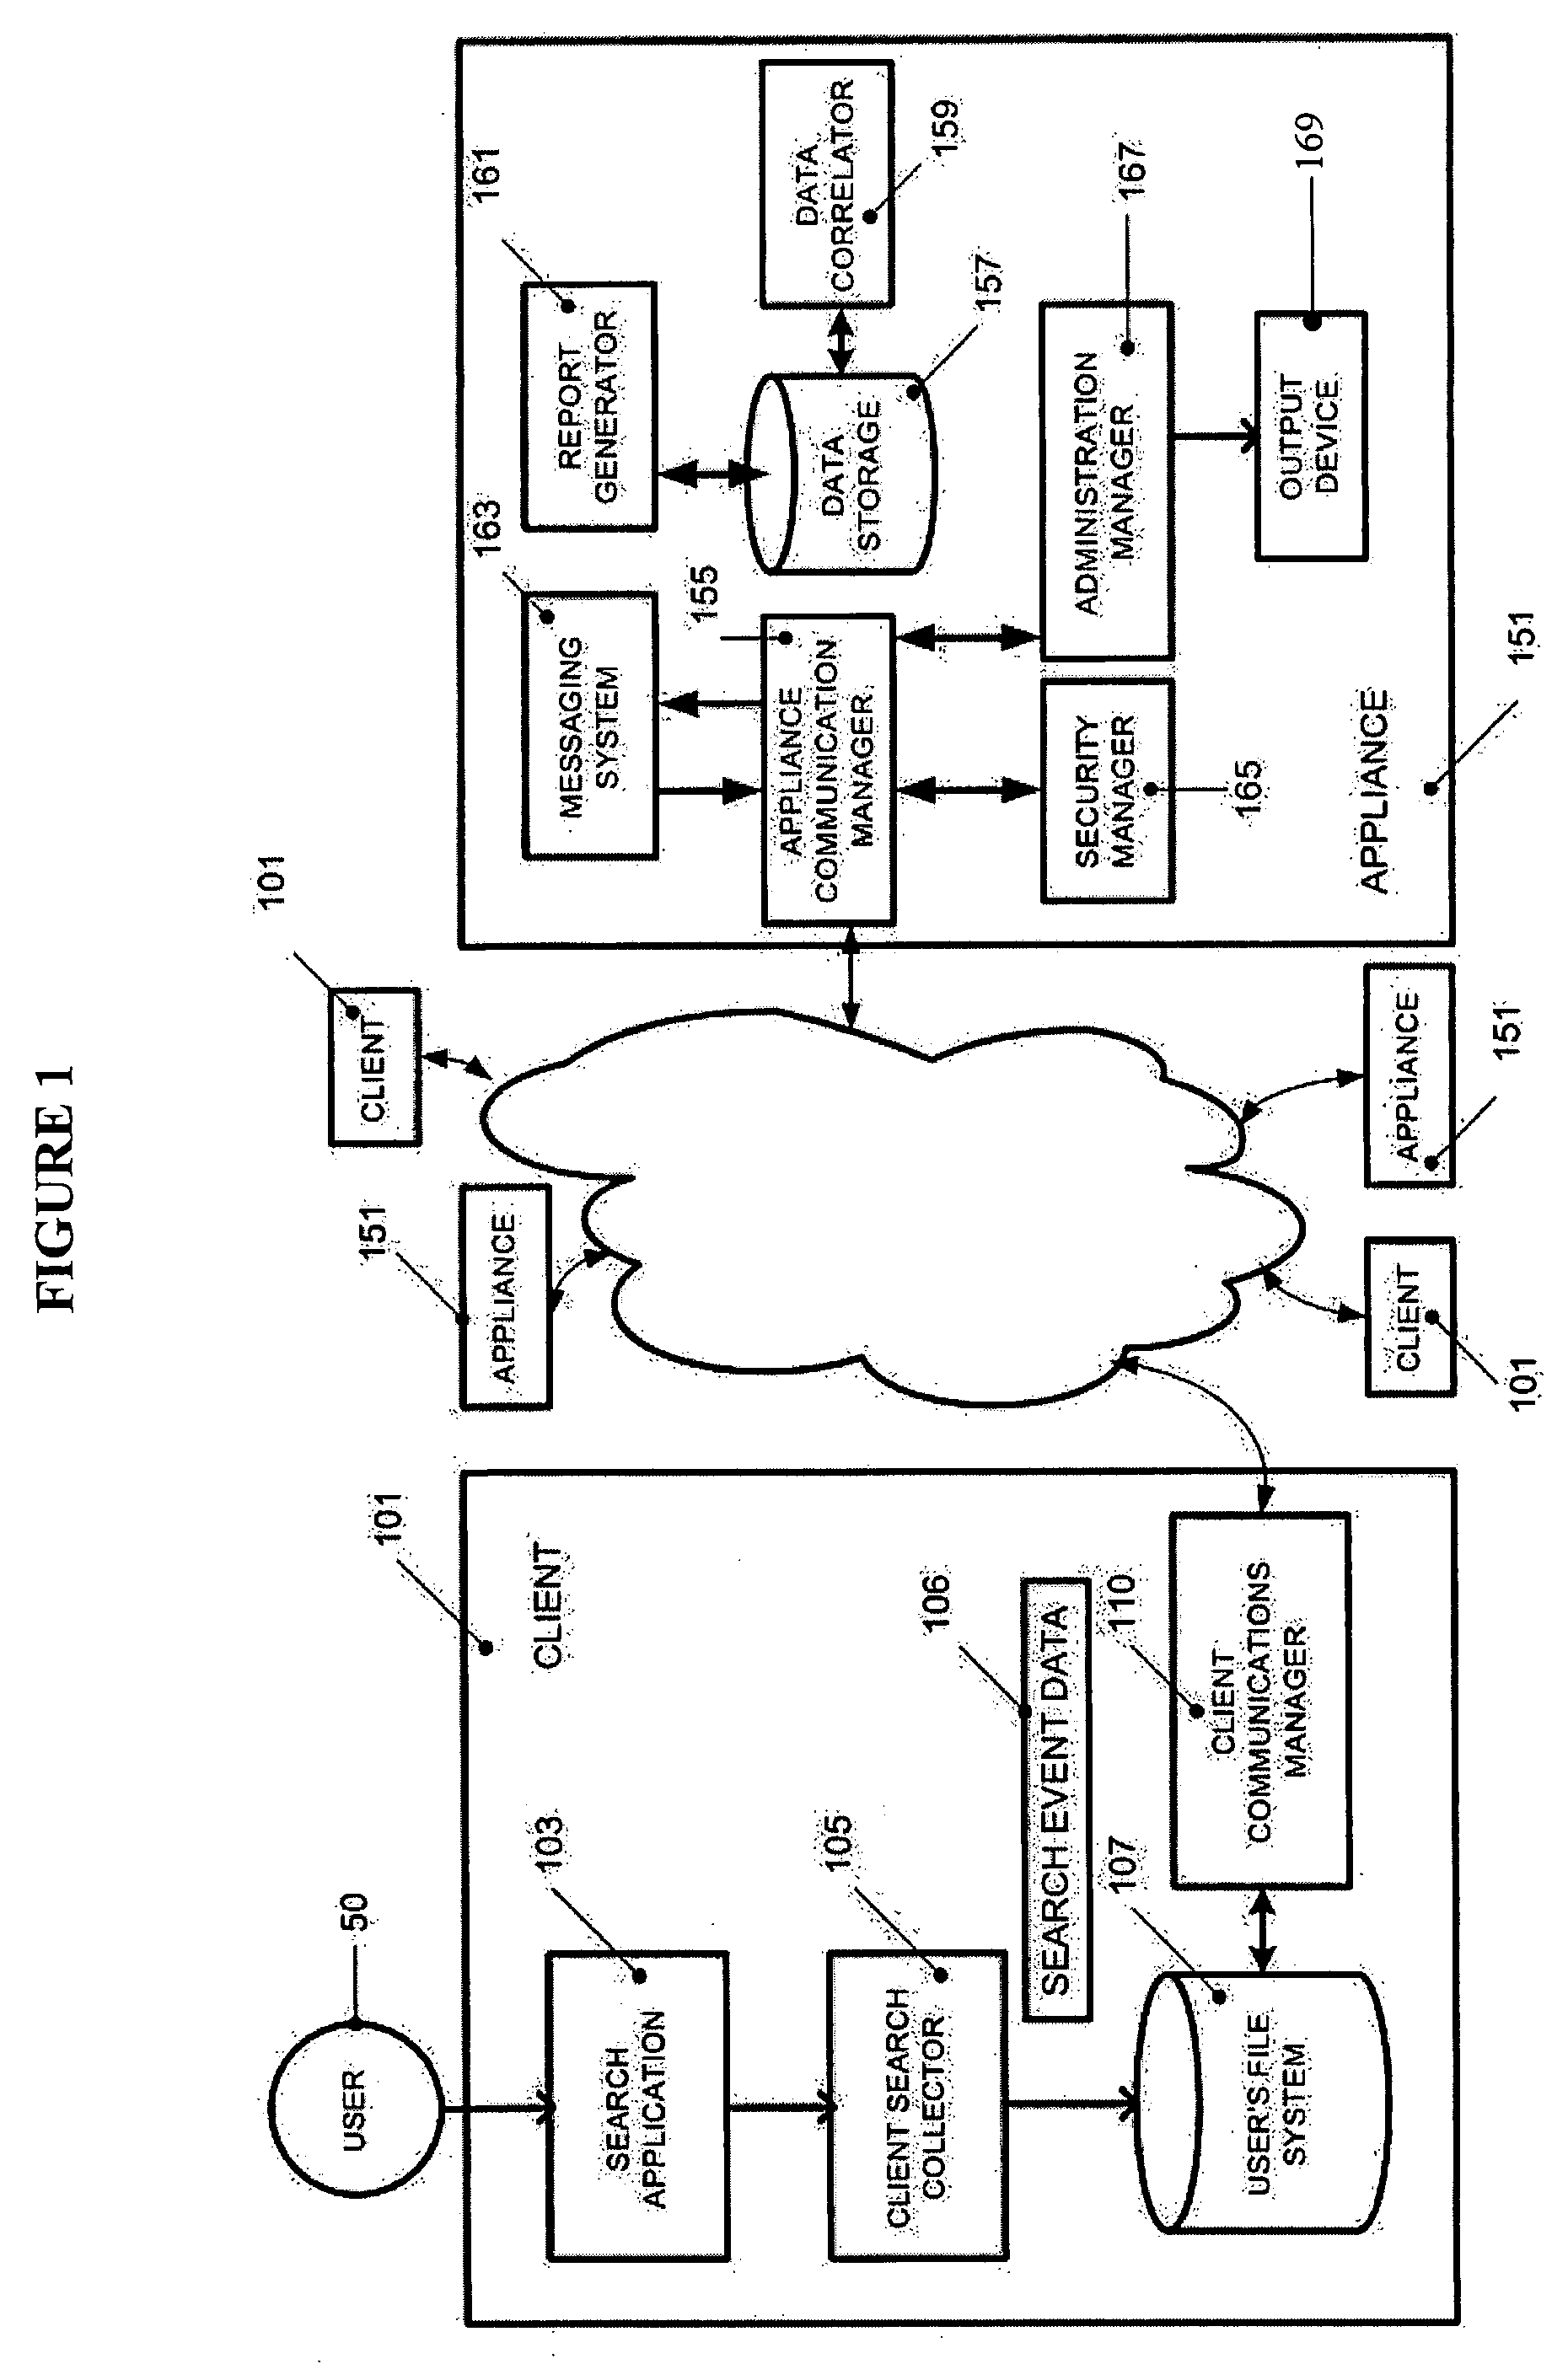 System and method for sharing of search query information across organizational boundaries